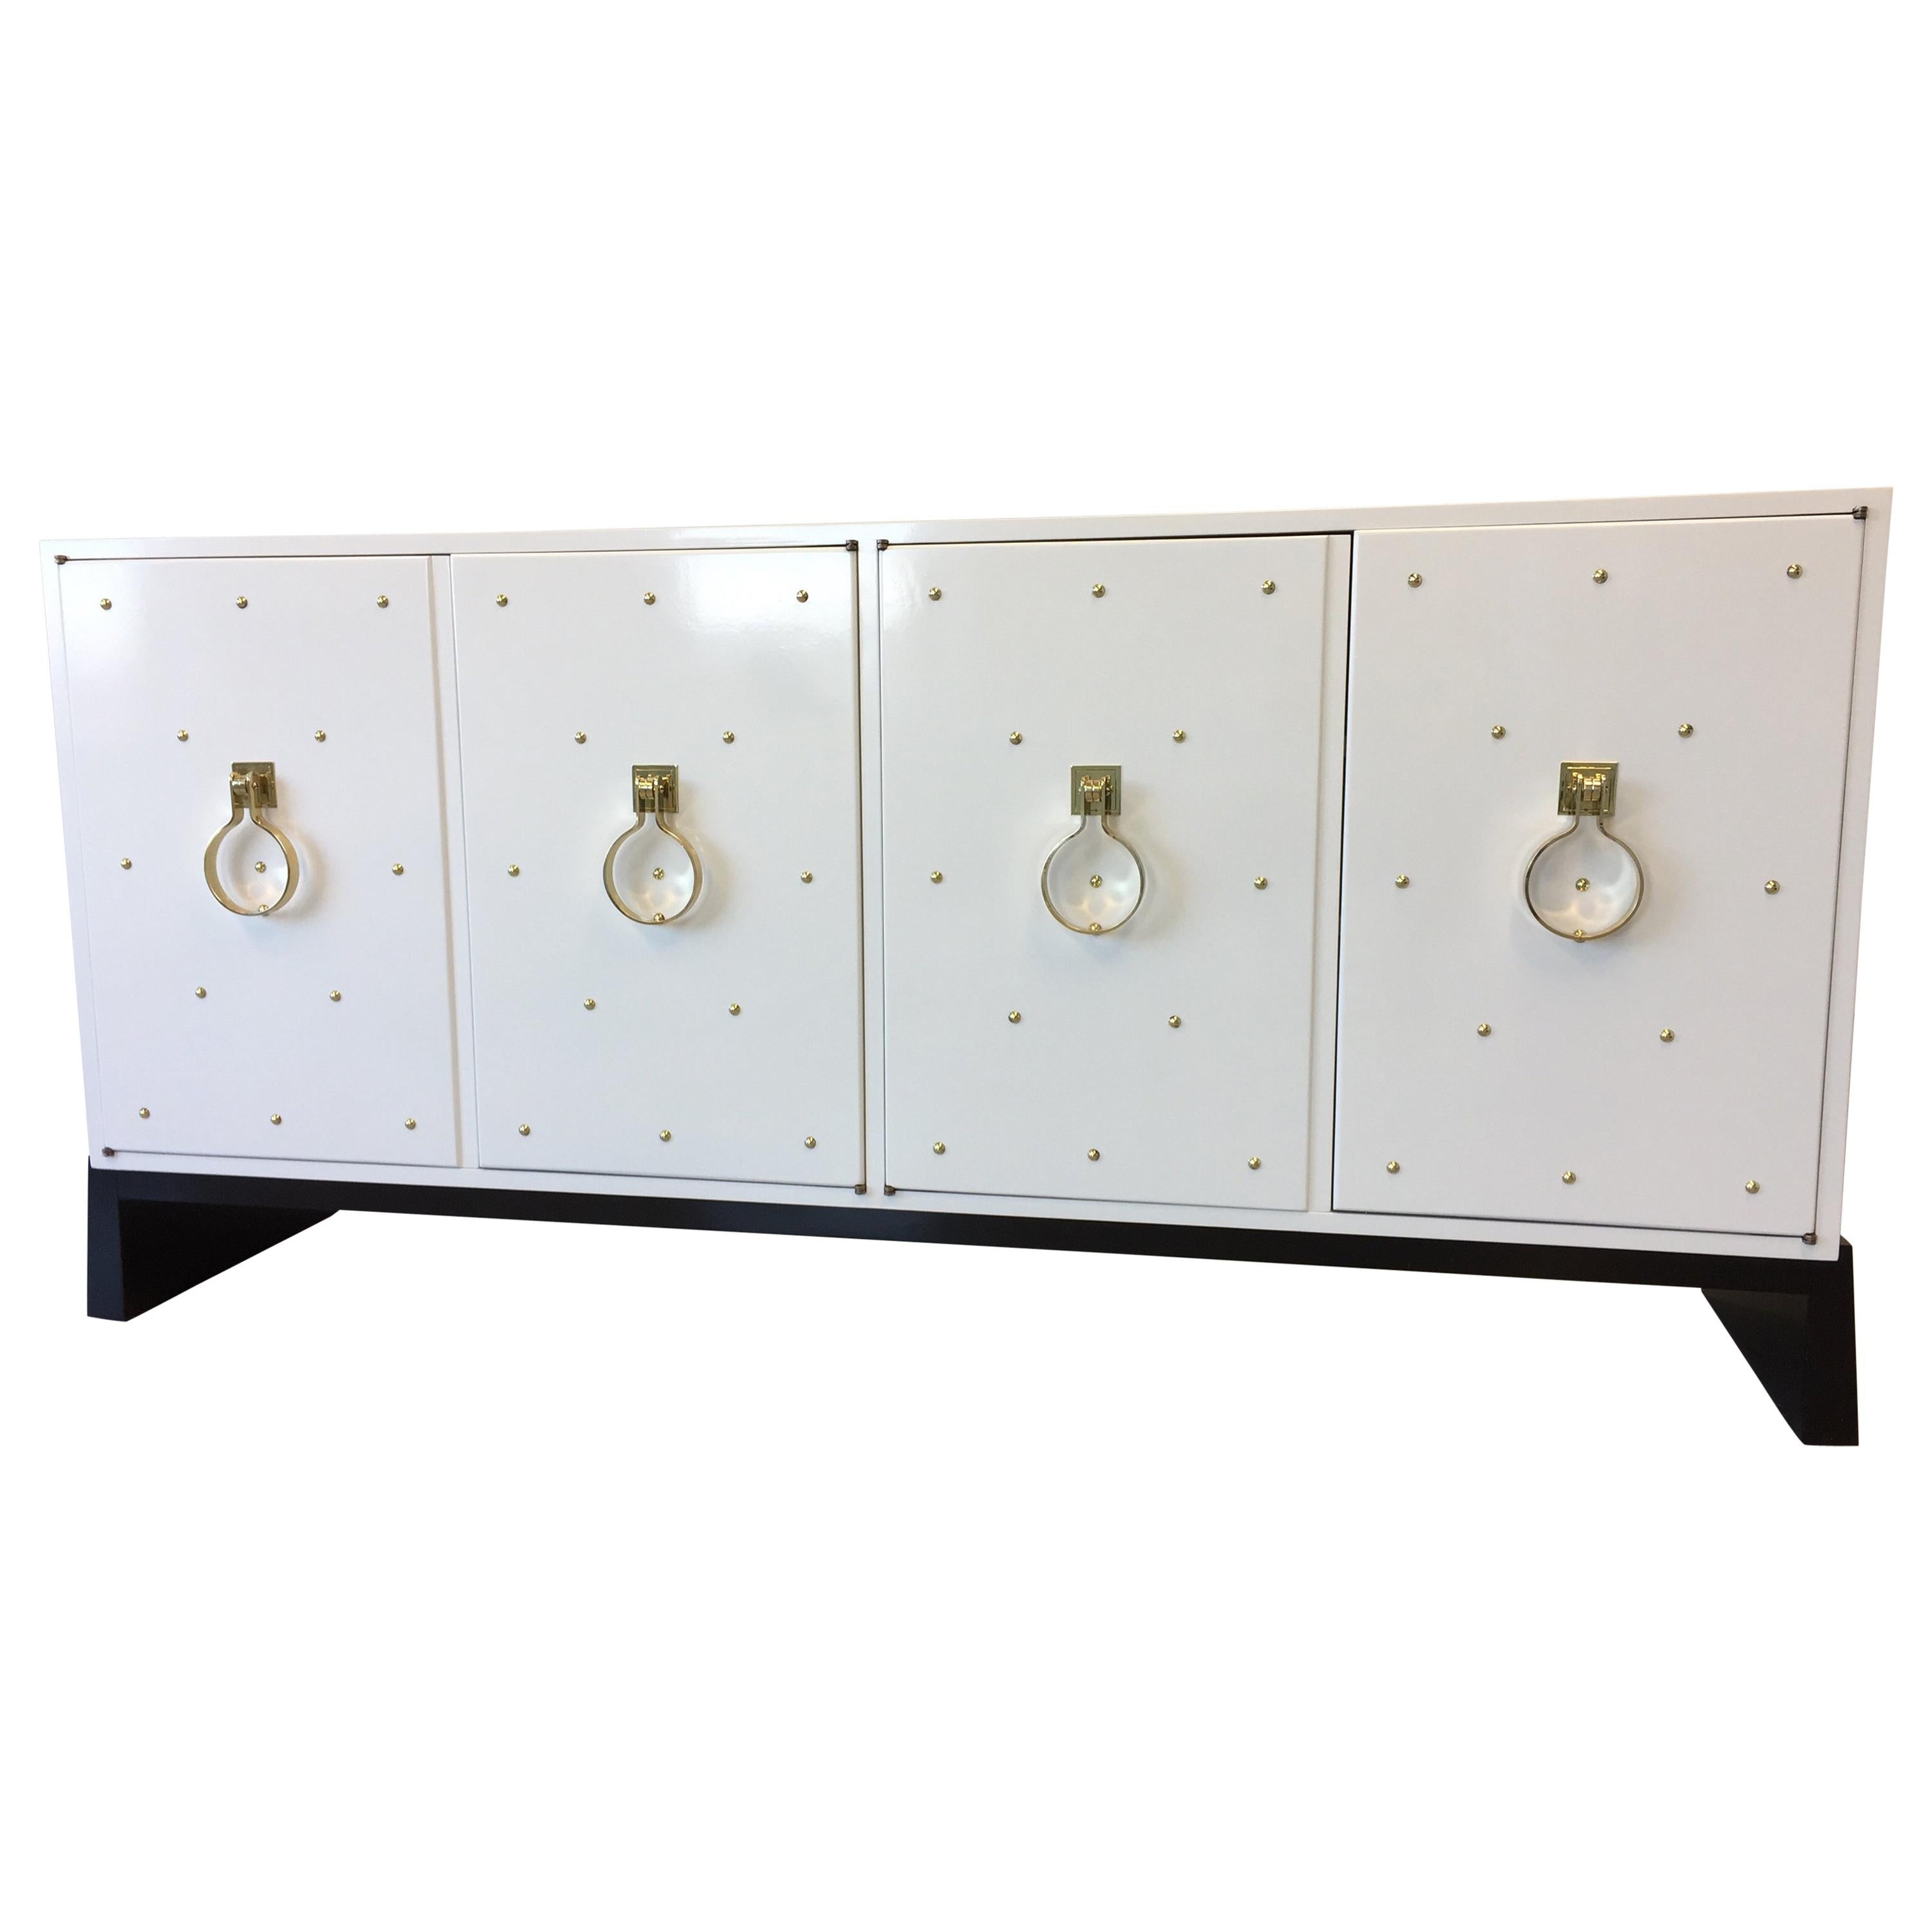 Parzinger Original White Lacquered Studded Cabinet